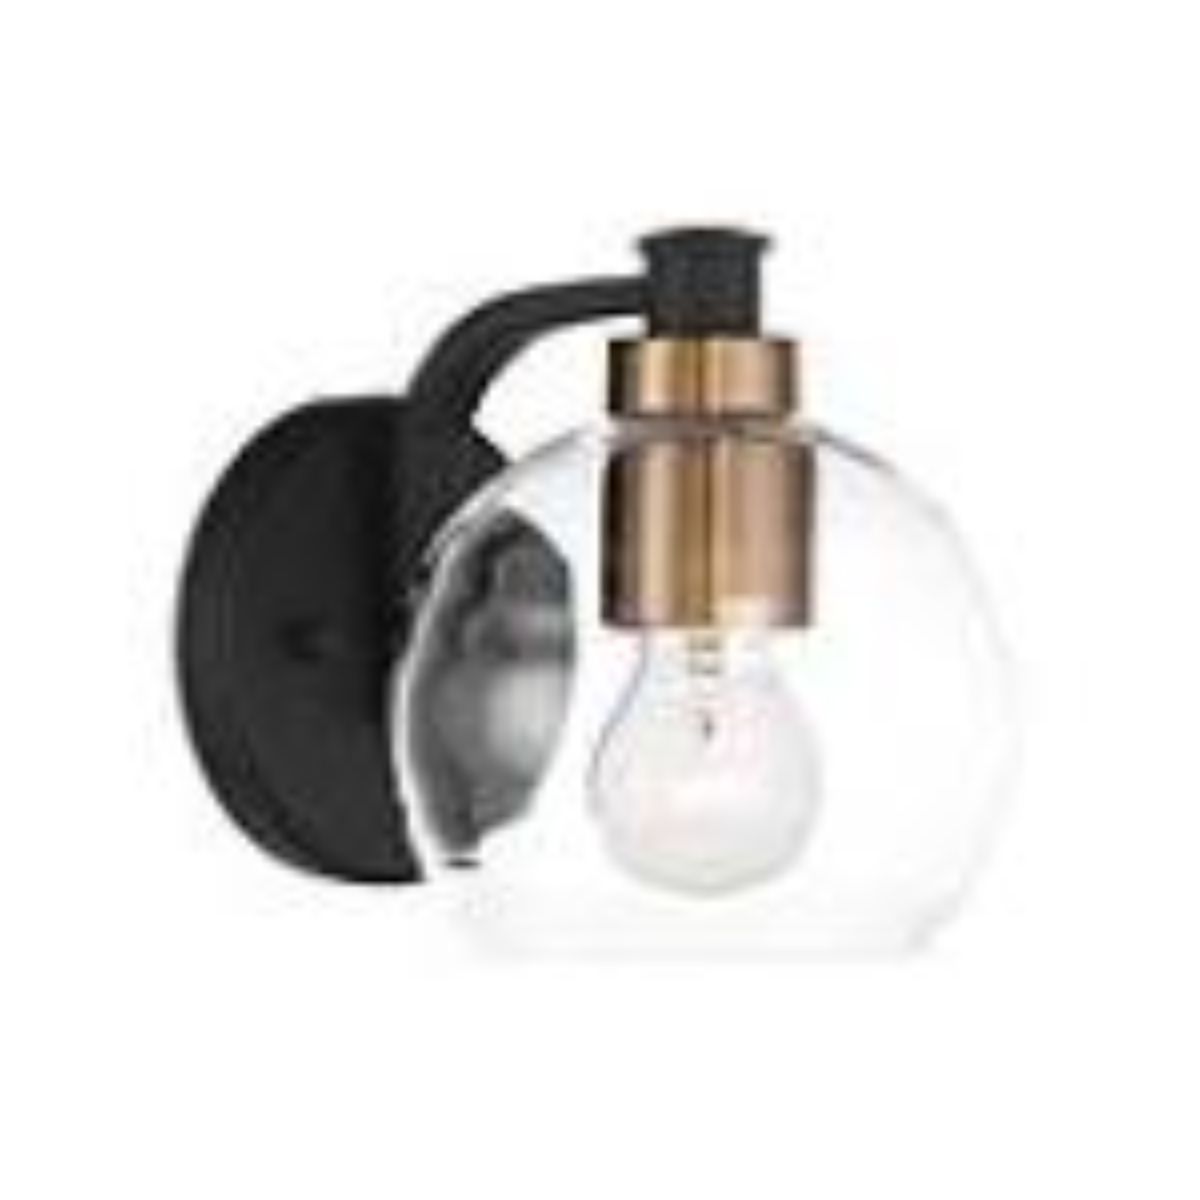 Keyport 8 in. Wall Sconce Black & Brushed Brass finish